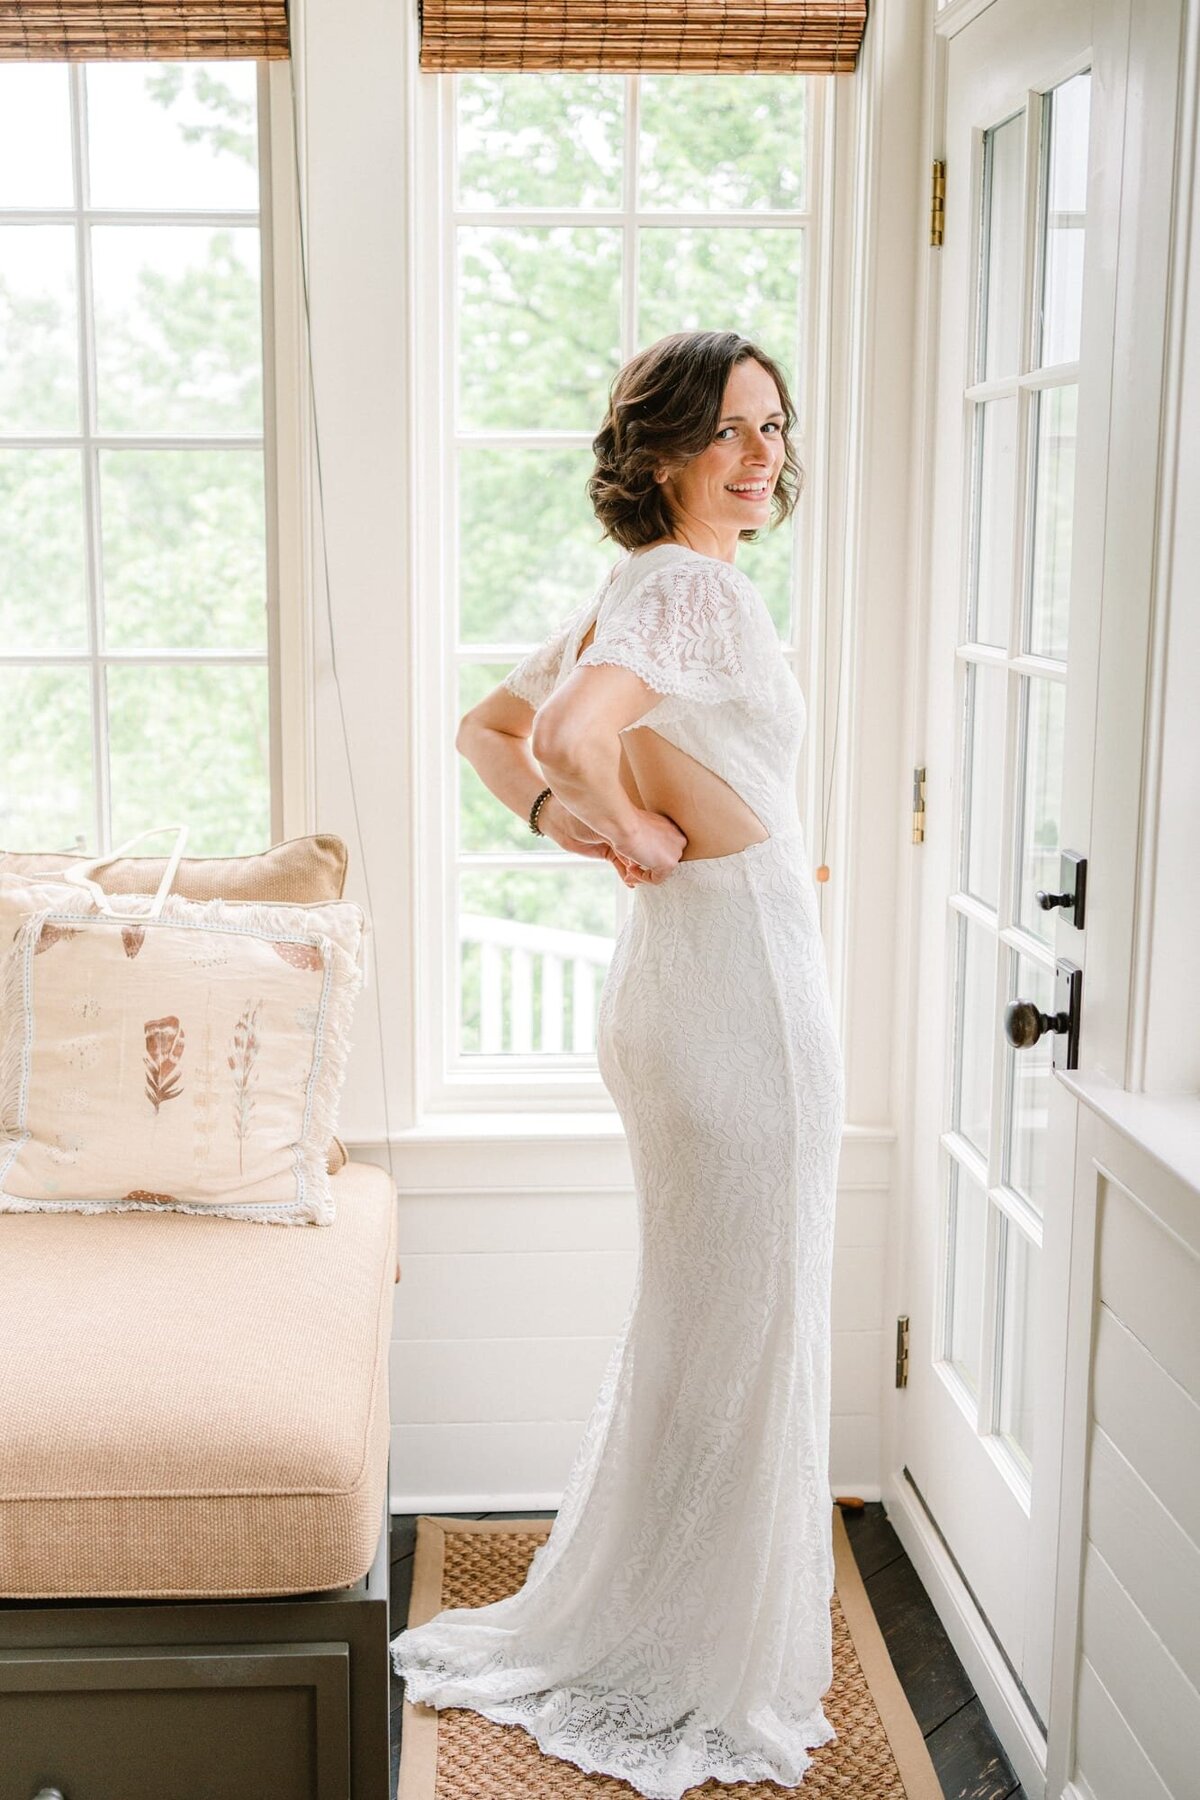 Bride zips up dress while getting ready at Waterperry Farm wedding